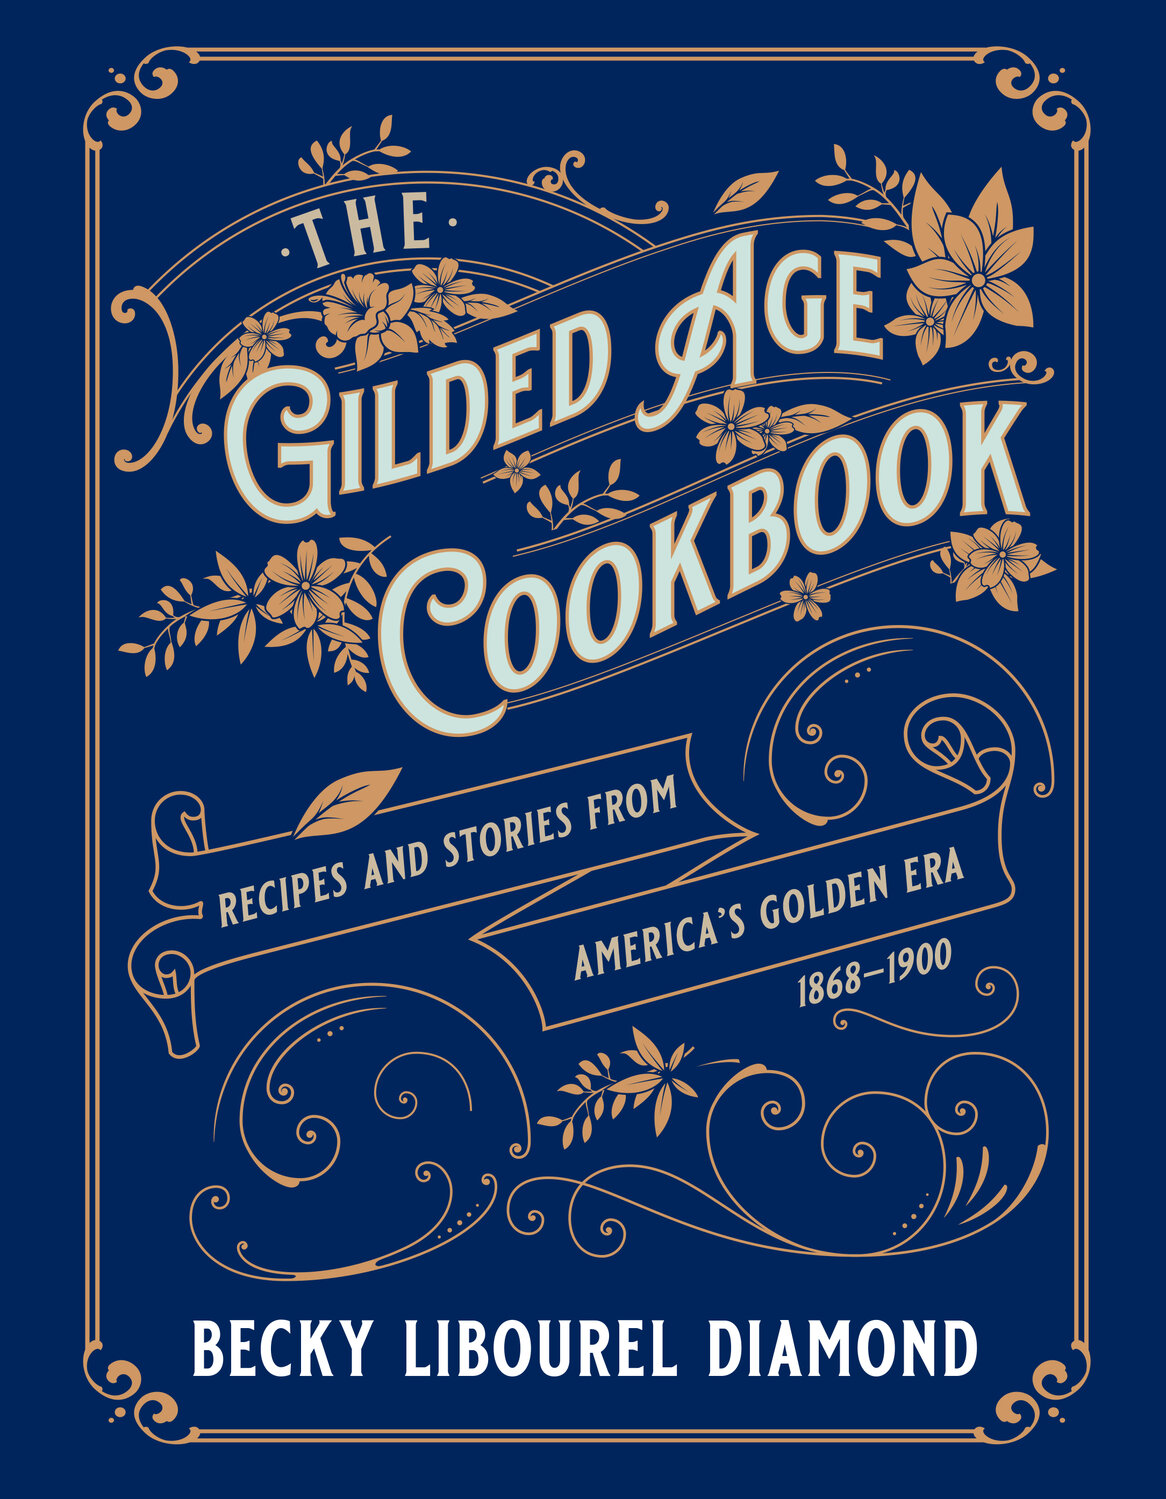 “The Gilded Age Cookbook” takes chefs of all skill levels on a culinary tour of the Gilded Age.